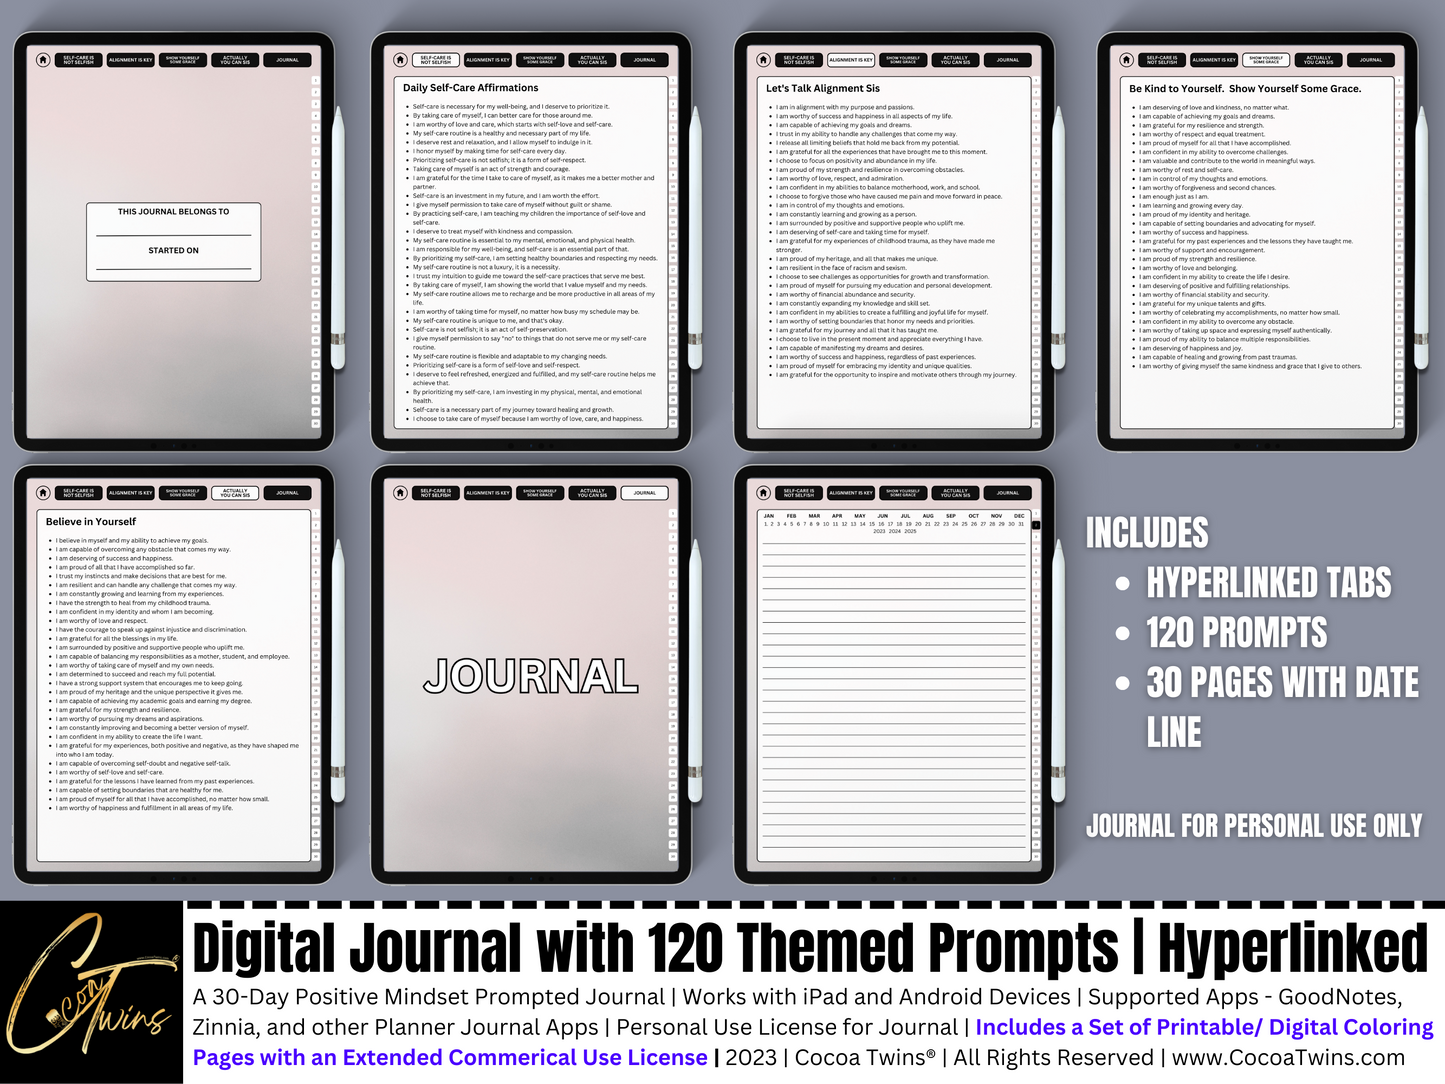 Mindset Matters - Believe In Yourself | A Hyperlinked Digital Journal with 120 Themed Prompts